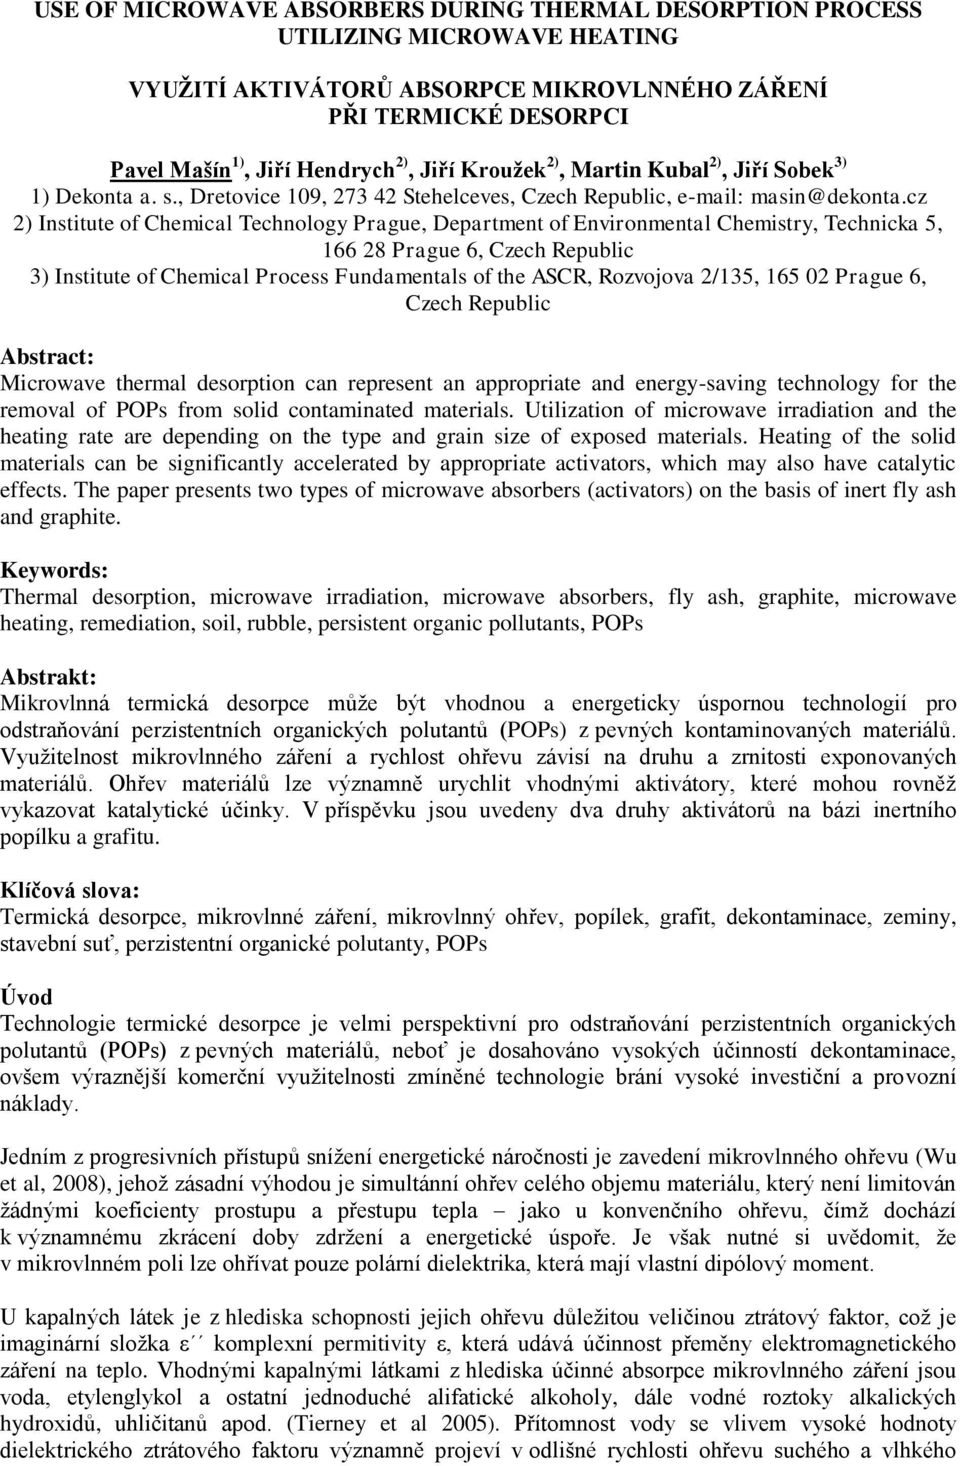 cz 2) Institute of Chemical Technology Prague, Department of Environmental Chemistry, Technicka 5, 166 28 Prague 6, Czech Republic 3) Institute of Chemical Process Fundamentals of the ASCR, Rozvojova